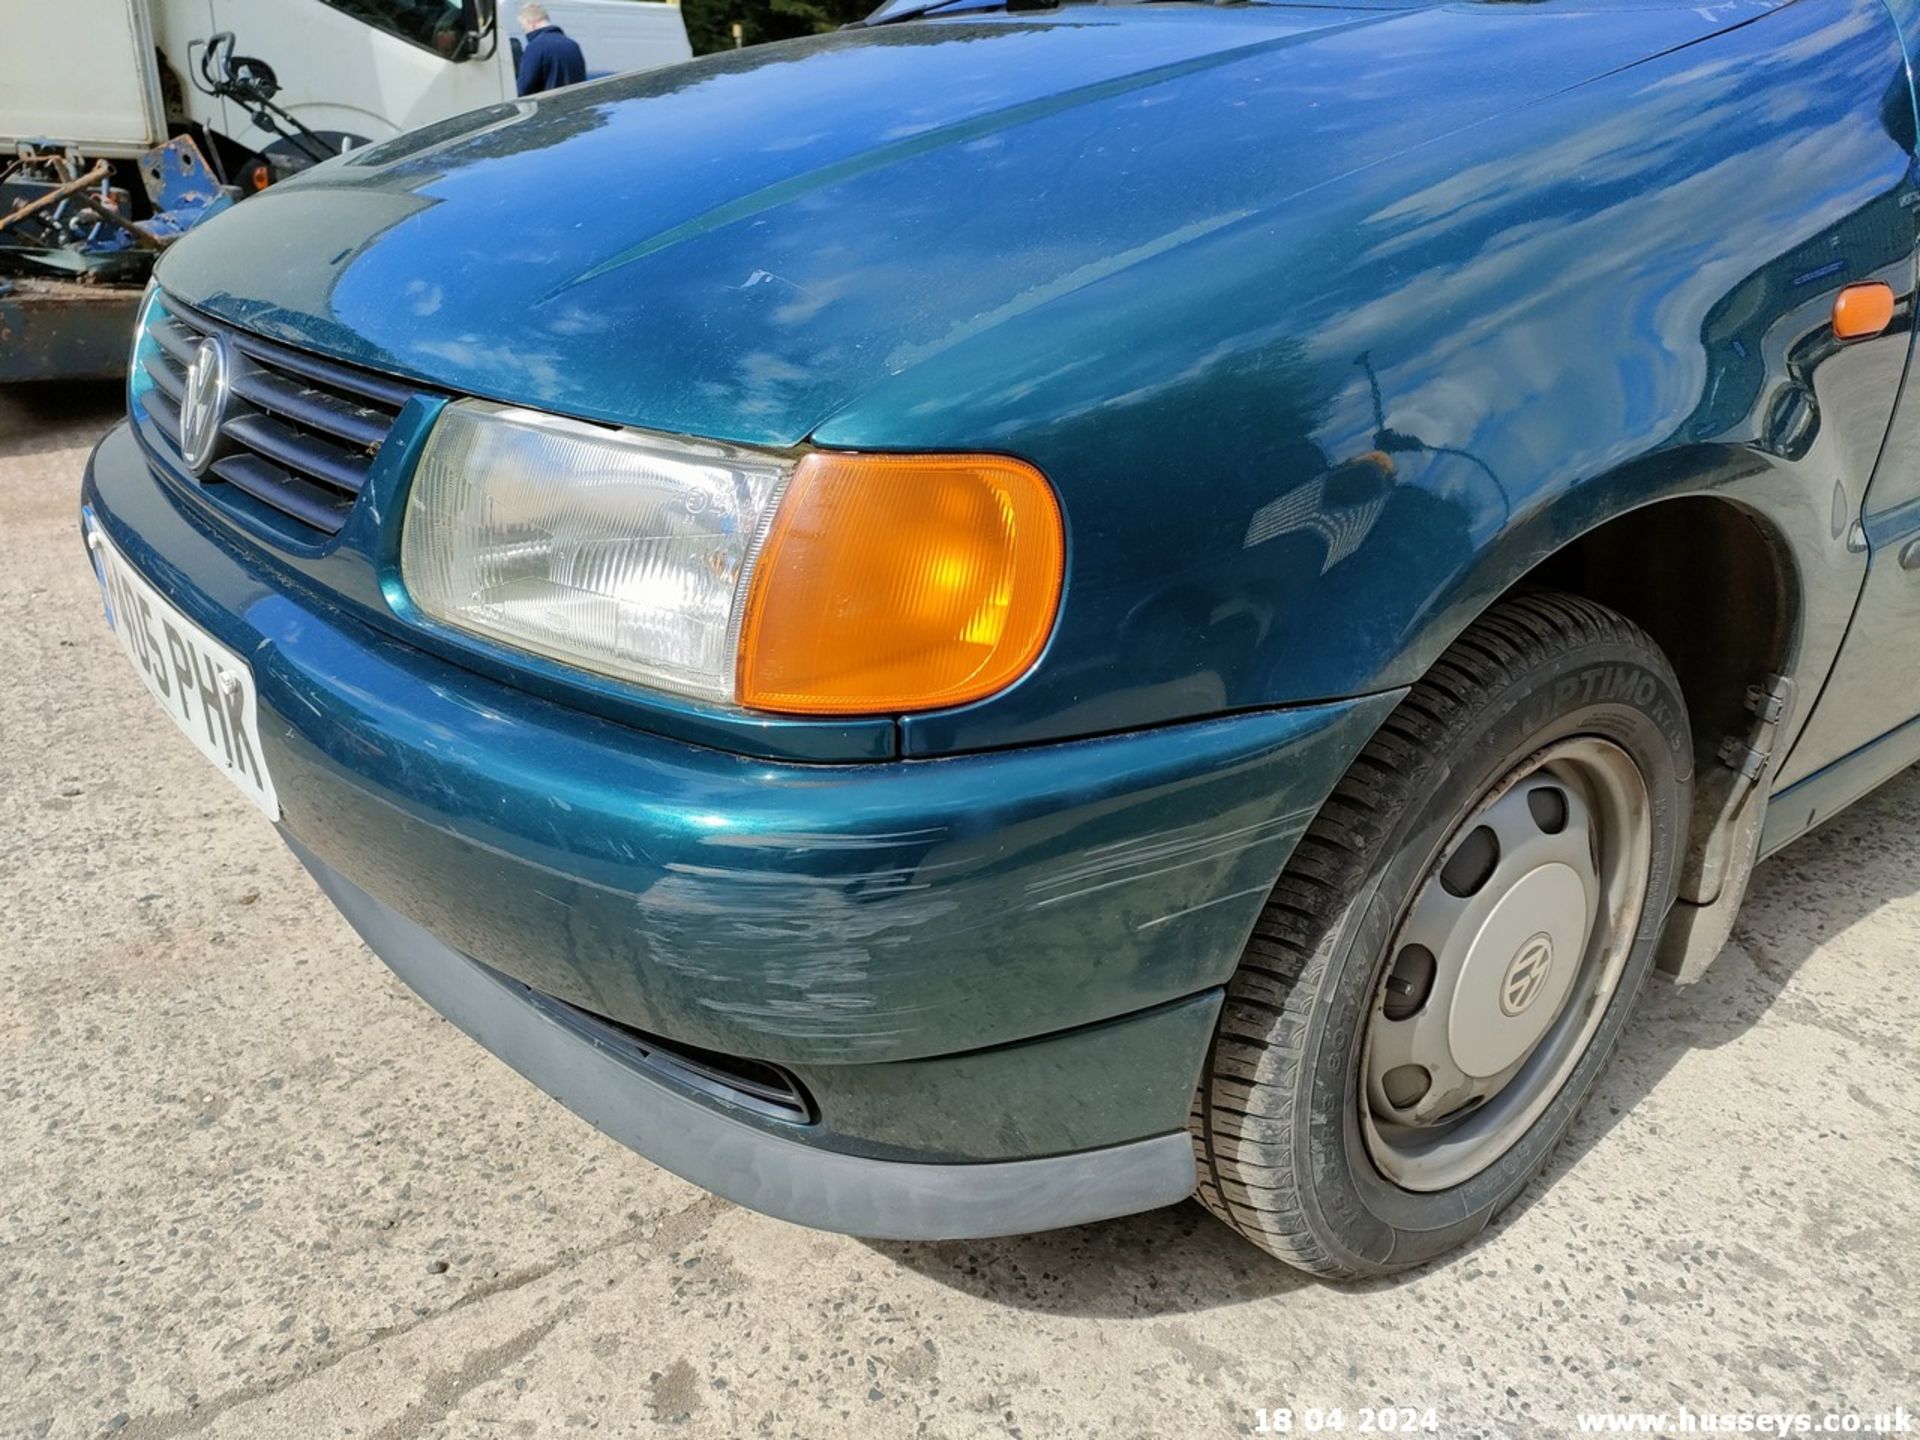 1997 VOLKSWAGEN POLO 1.4 CL AUTO - 1390cc 3dr Hatchback (Green, 68k) - Image 13 of 60